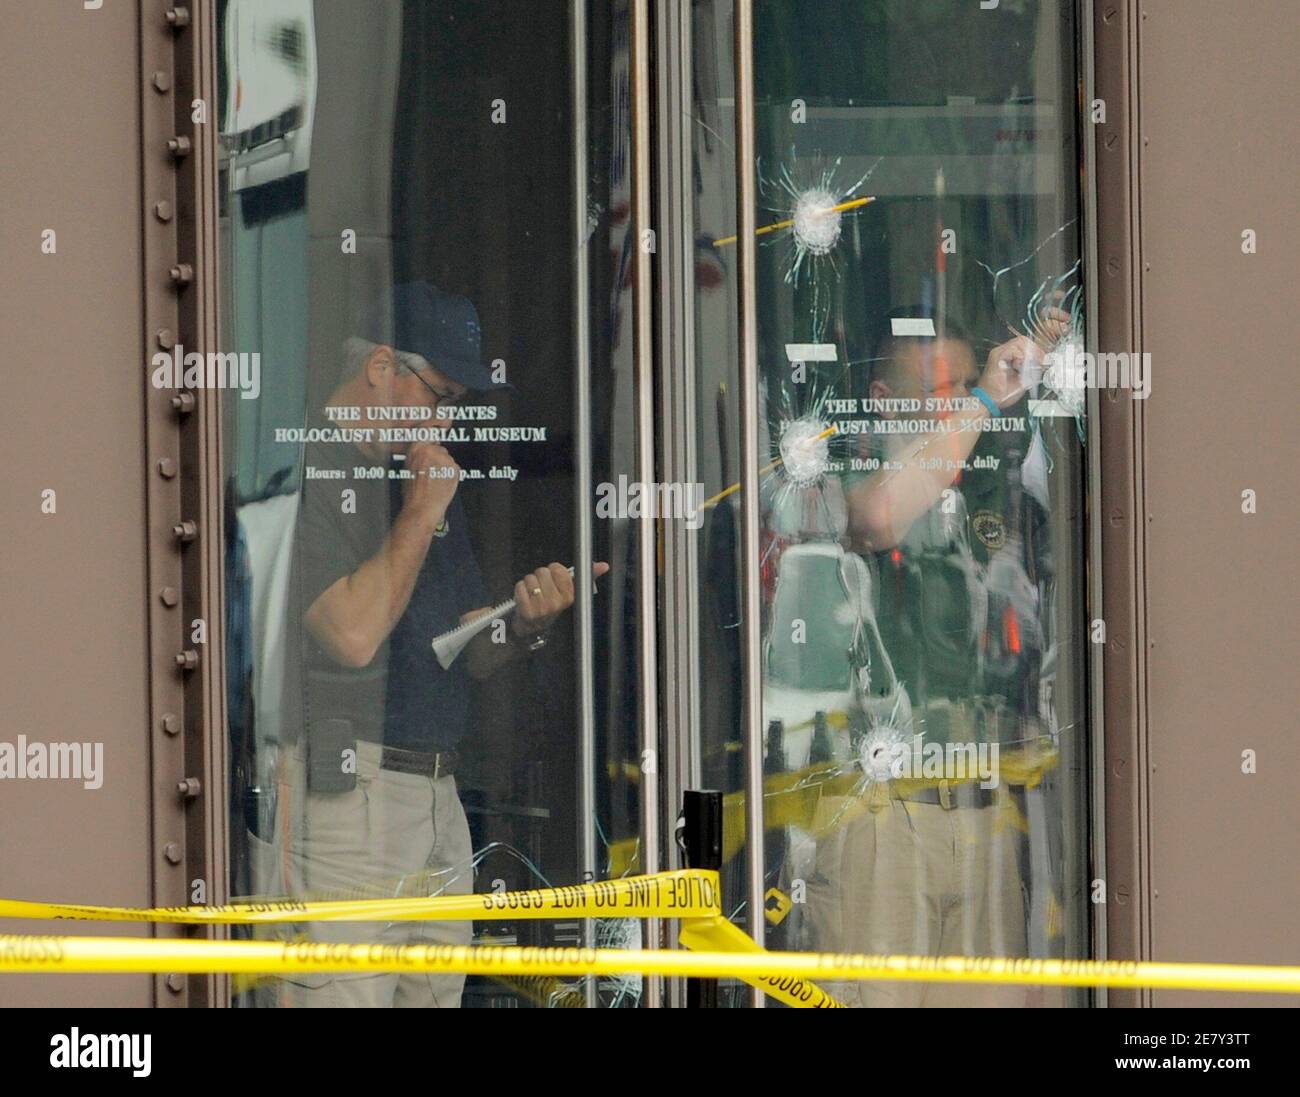 Forensic personnel inspect bullet holes in the glass entry doors at the Holocaust Memorial Museum in Washington, June 11, 2009. An elderly gunman, 88-year old James von Brunn, entered the museum yesterday with a rifle, killing security guard Stephen Tyrone Johns before von Brunn was shot and seriously wounded by other security personnel. The museum was closed today in Johns' memory.     REUTERS/Mike Theiler (UNITED STATES CRIME LAW) Stock Photo